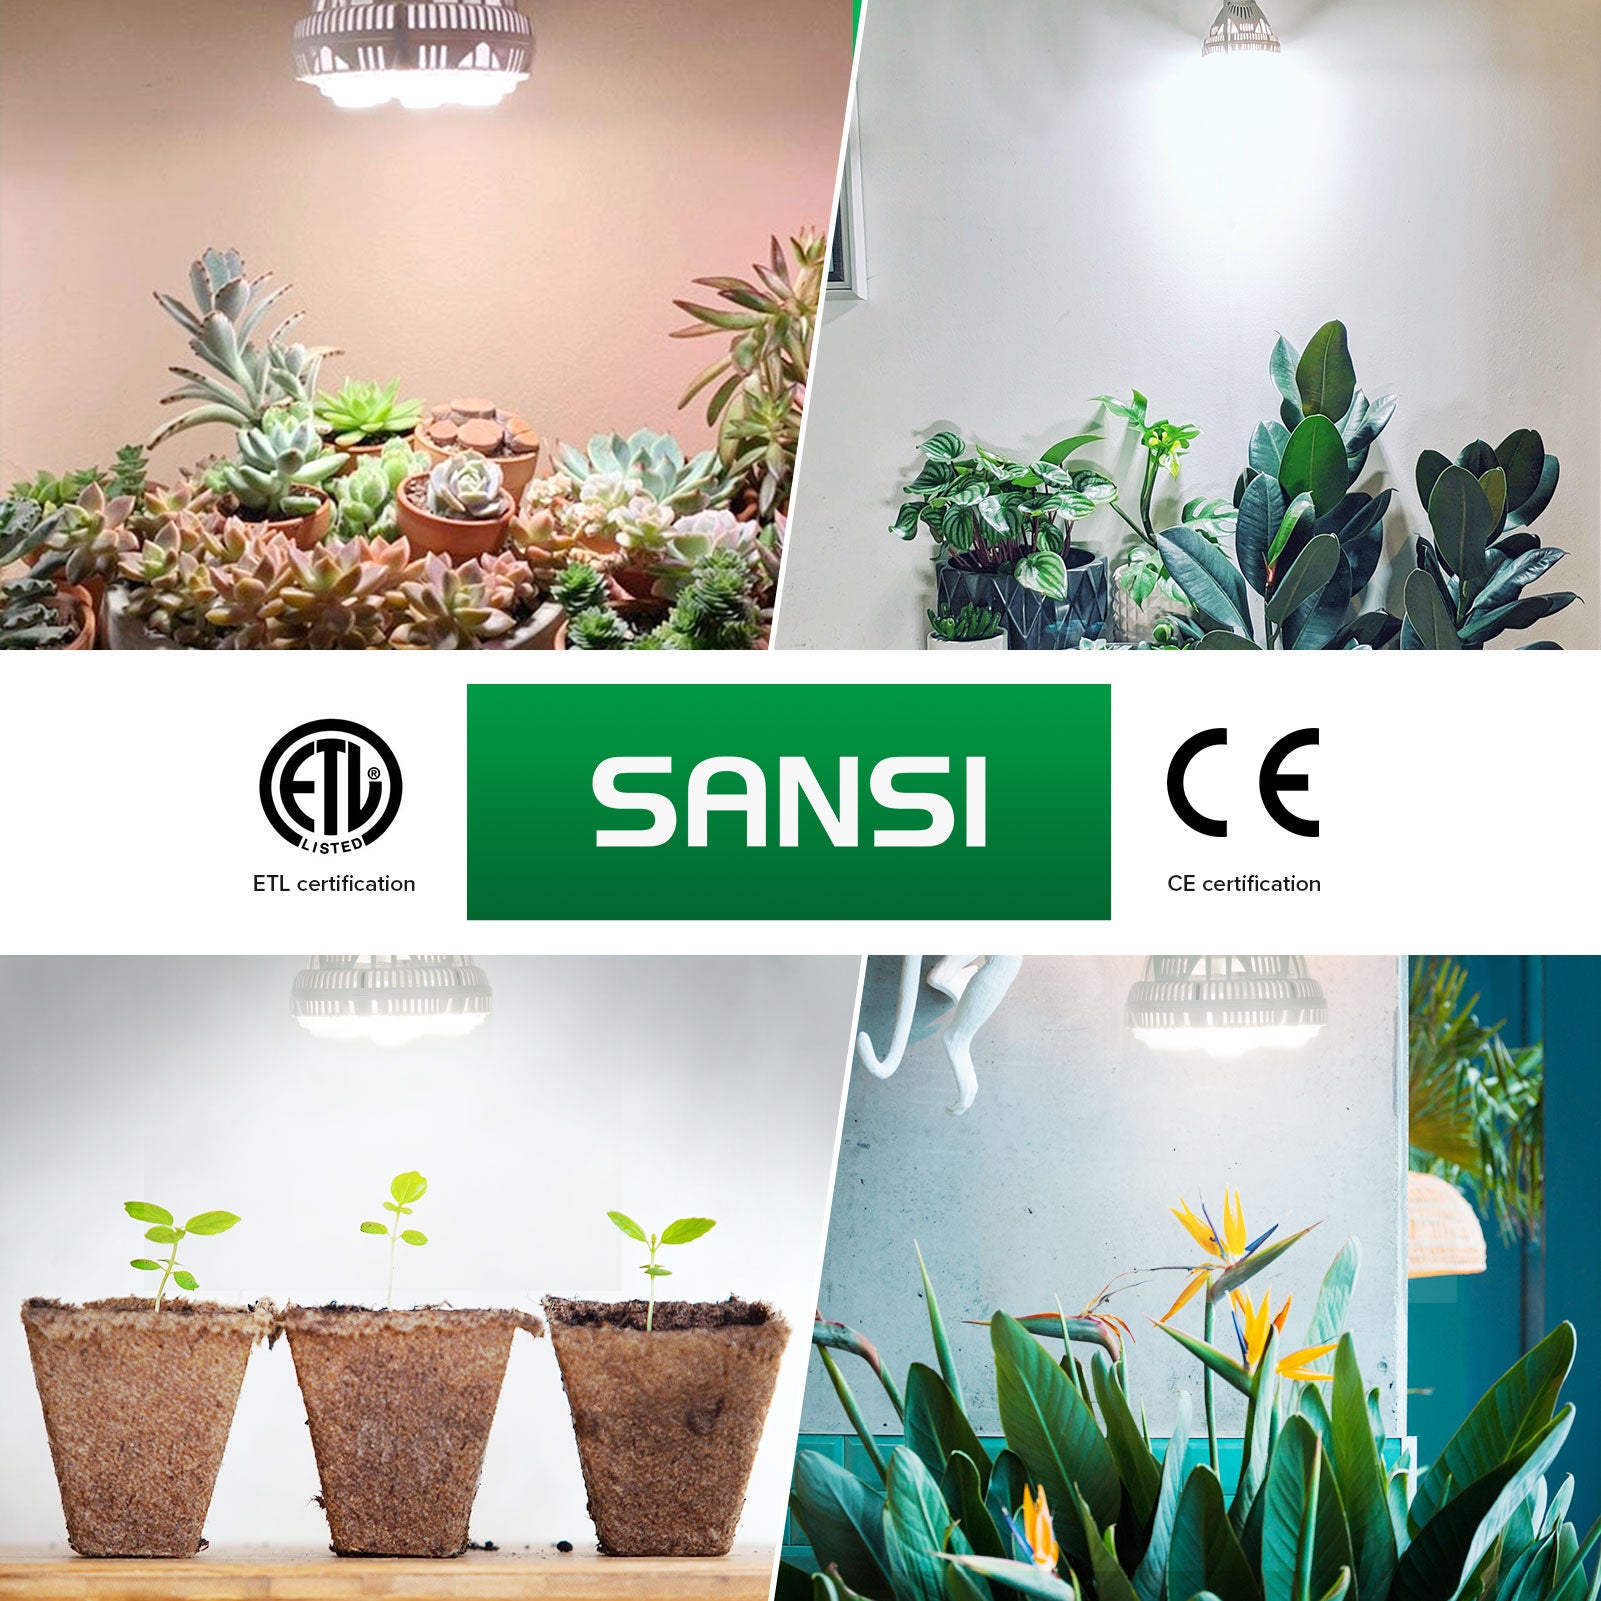 36W led grow light bulb with white light for high light plants indoor has ETL and CE certification